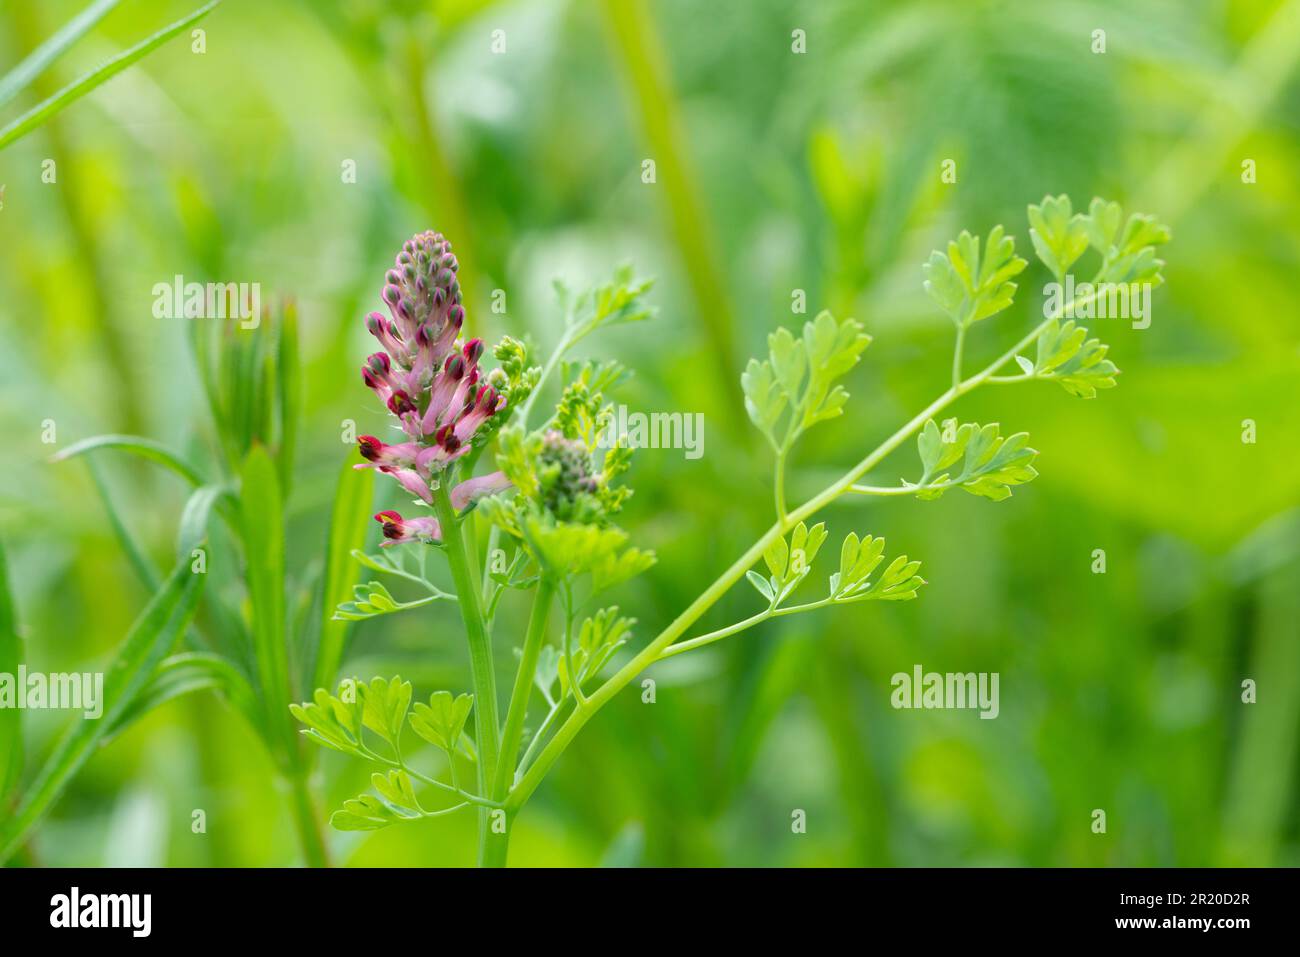 Italy, Lombardy, Common Fumitory Flower, Fumaria Officinalis Stock Photo